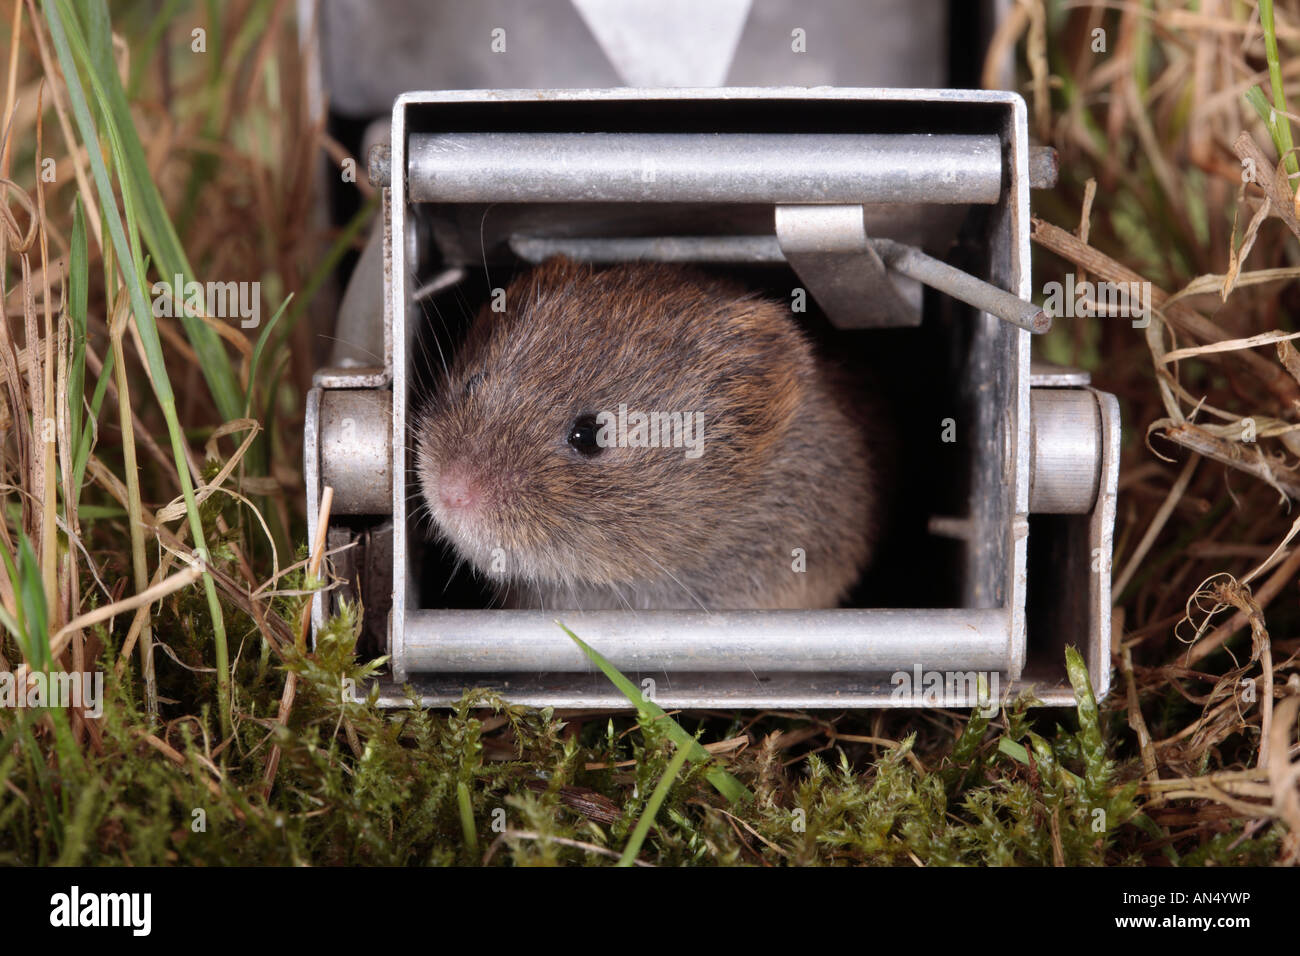 https://c8.alamy.com/comp/AN4YWP/longworth-live-trap-with-short-tailed-vole-microtus-agrestis-potton-AN4YWP.jpg